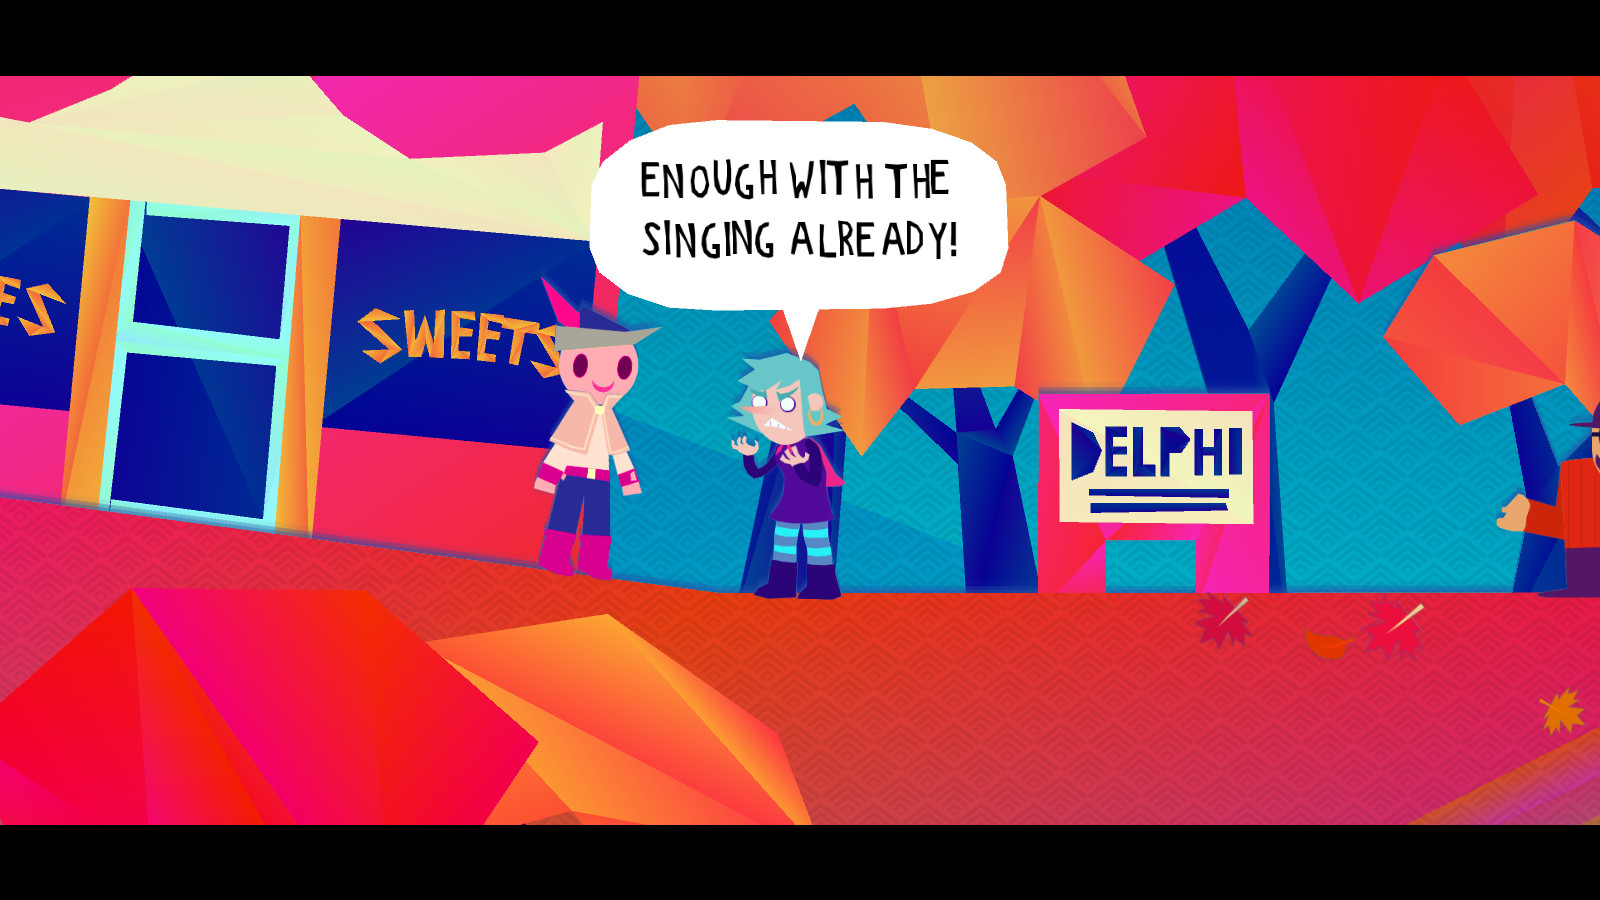 Wandersong Free Download